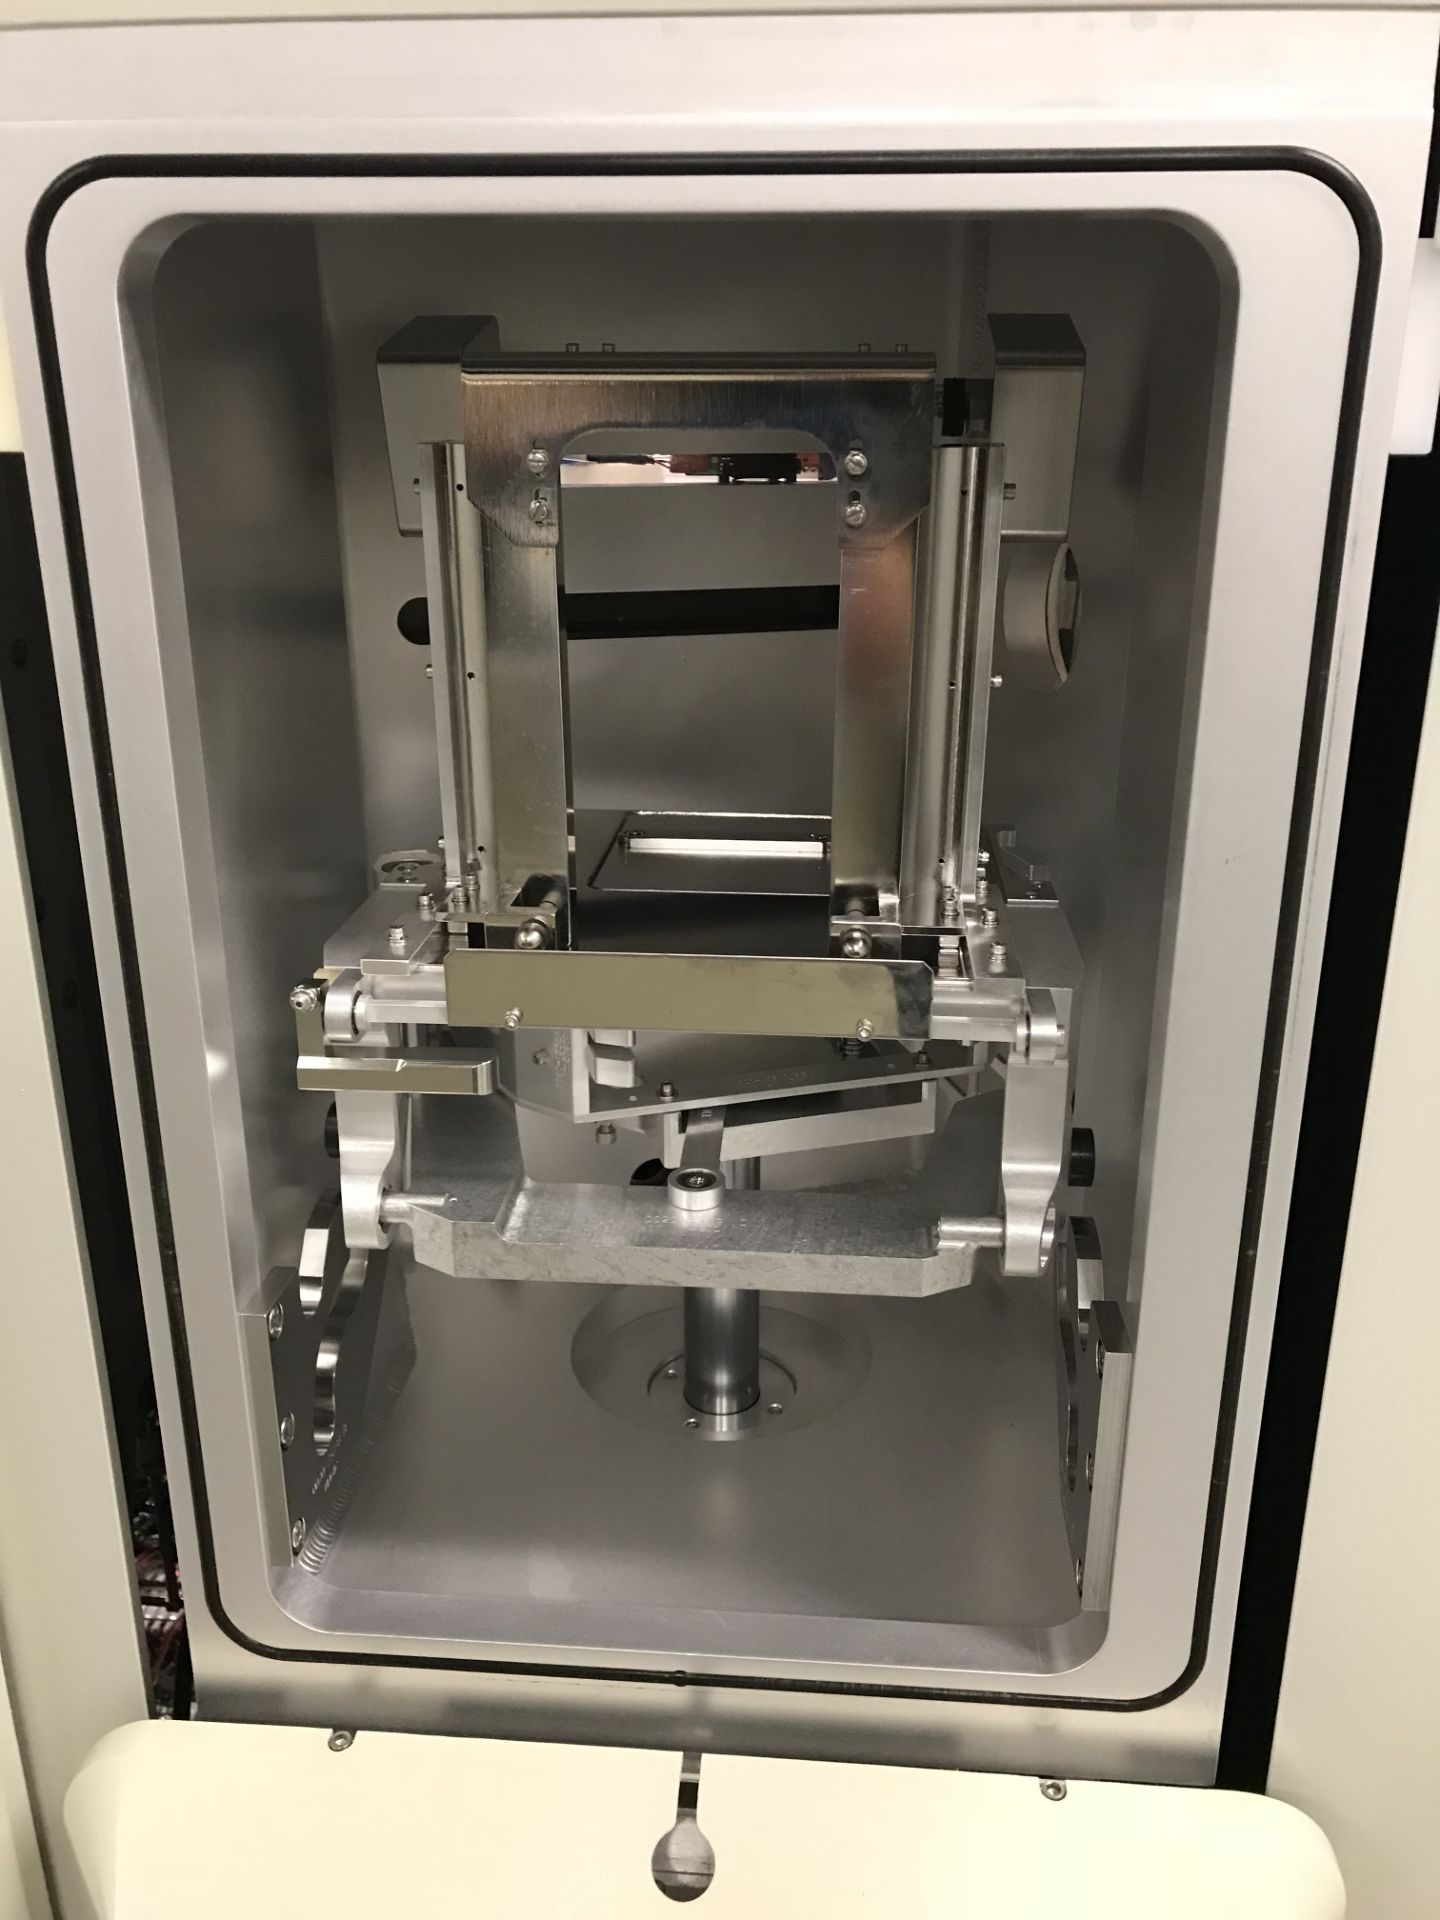 Applied Materials Centura DPS (Decoupled Plasma Source) Etcher, Size: 6" Wafers, Vintage: 2001, S/ - Image 2 of 72